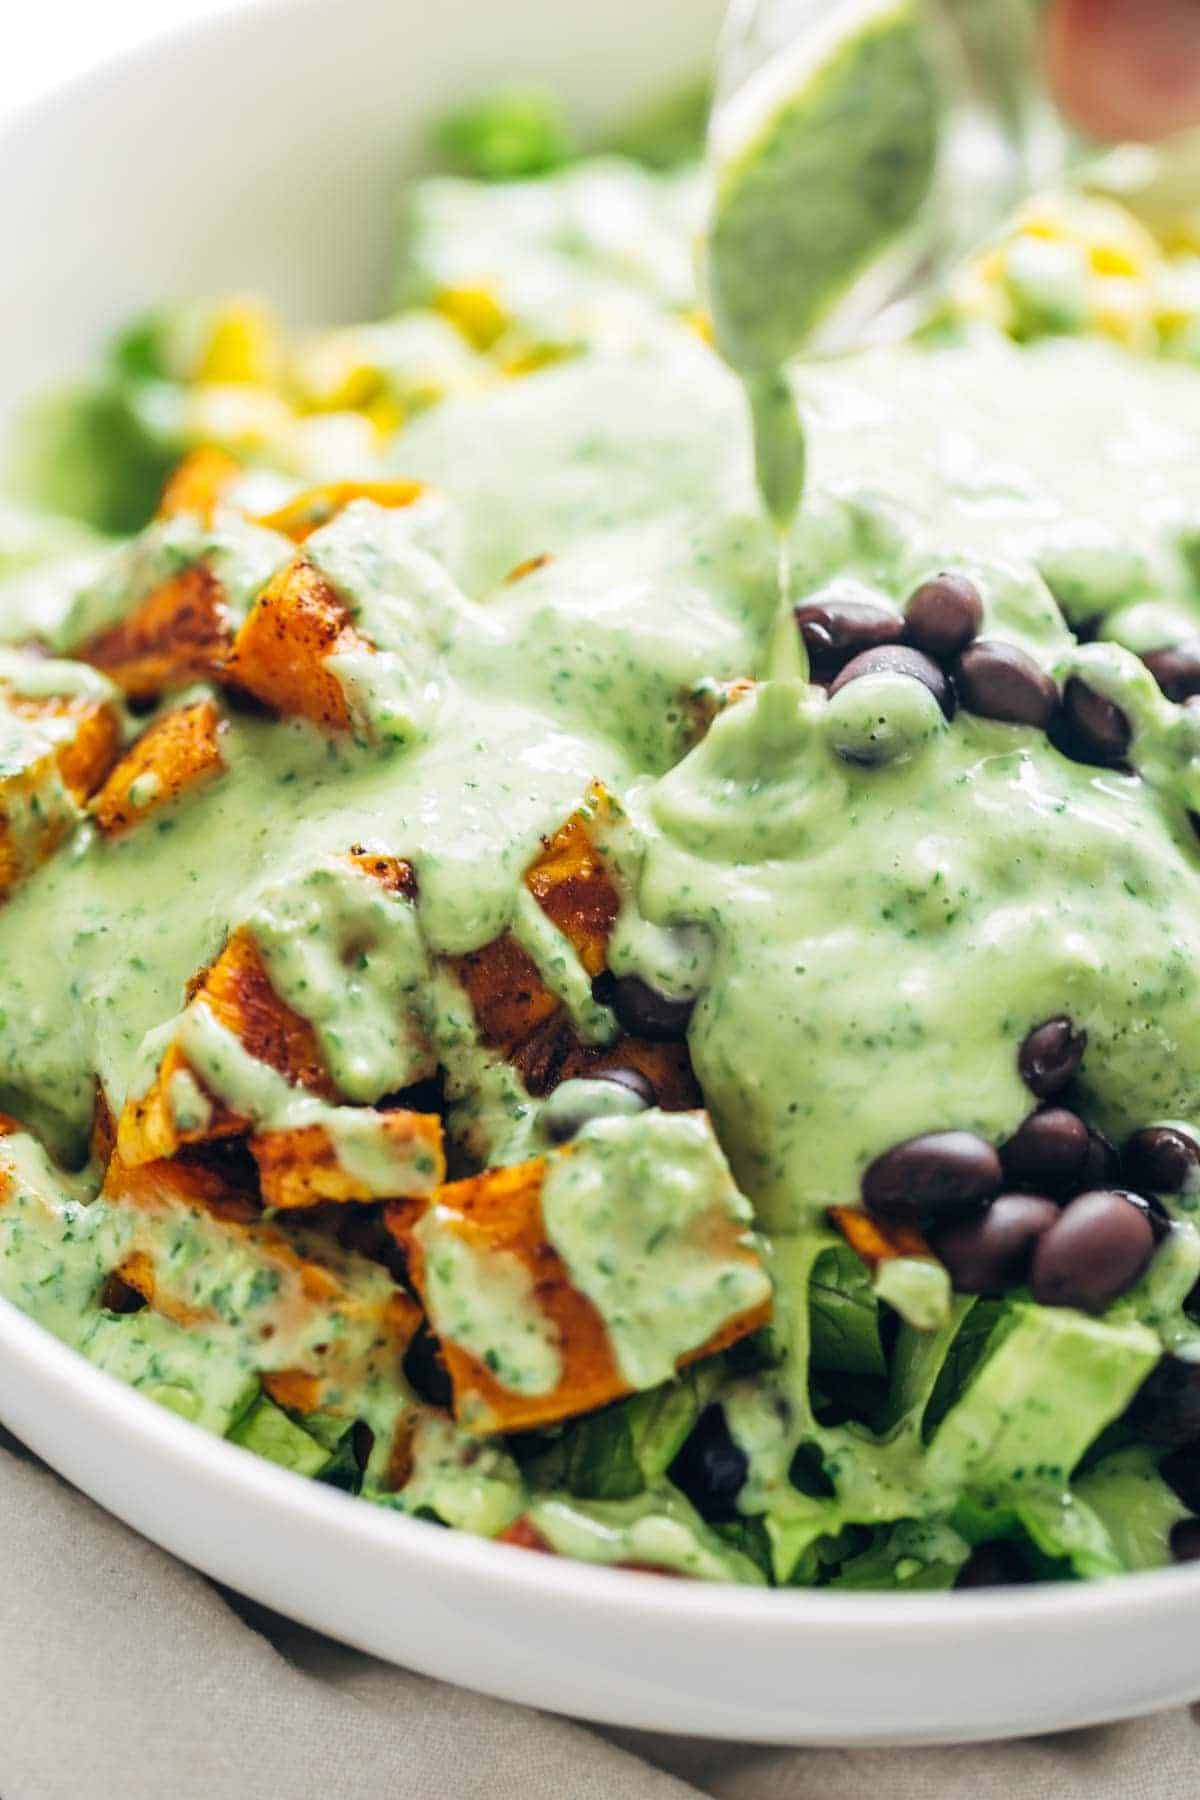 Cilantro Avocado Dressing - so easy and it goes on anything! made with simple ingredients like cilantro, avocado, Greek yogurt, garlic, and lime juice. LOVE! | pinchofyum.com